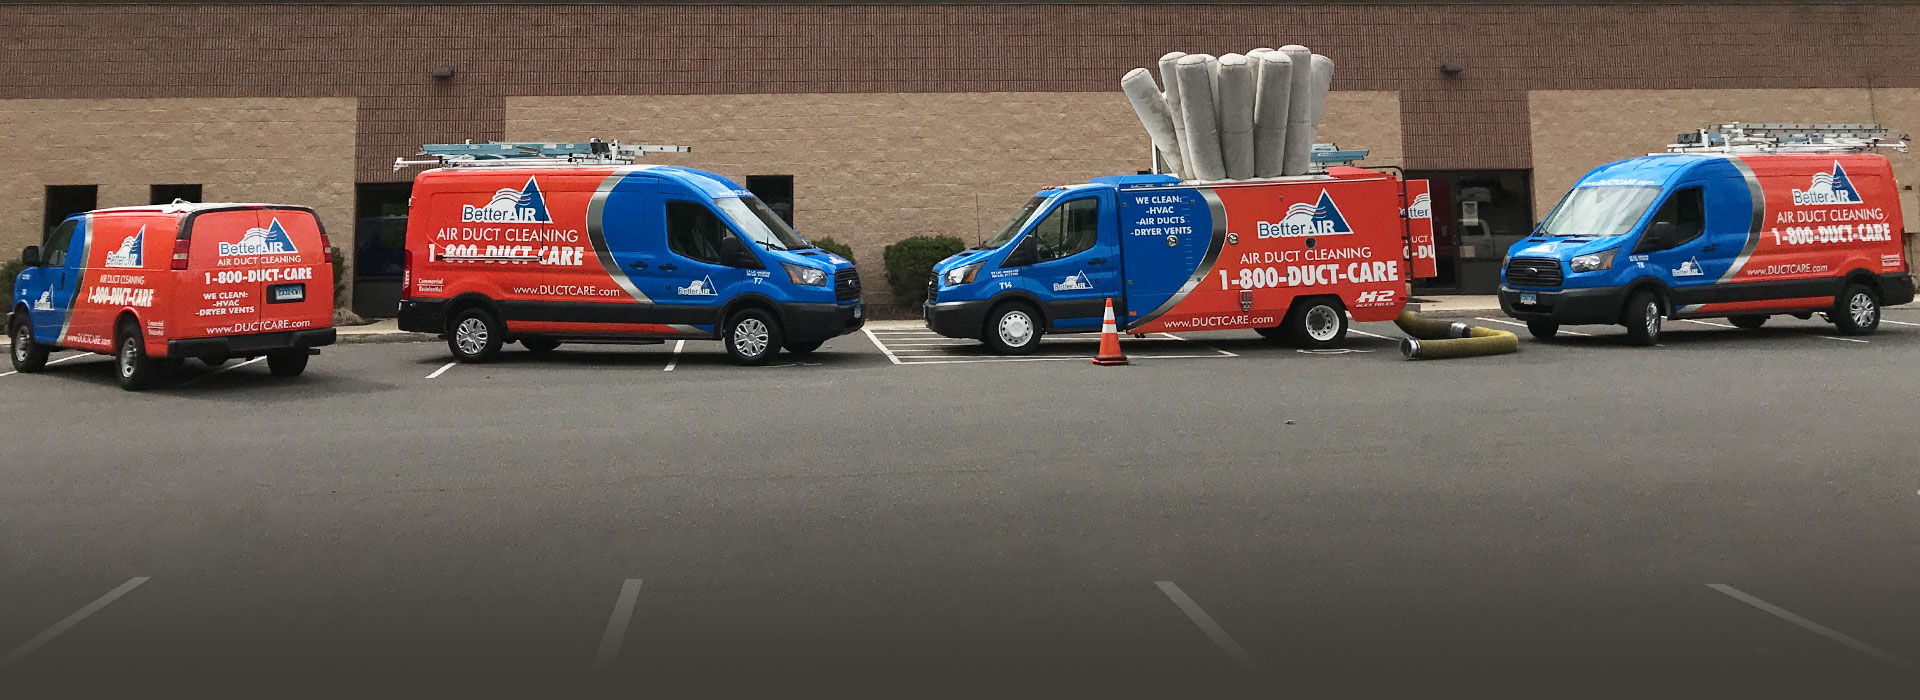 BETTER AIR - COMMERCIAL AIR DUCT CLEANING SERVICES - VANS